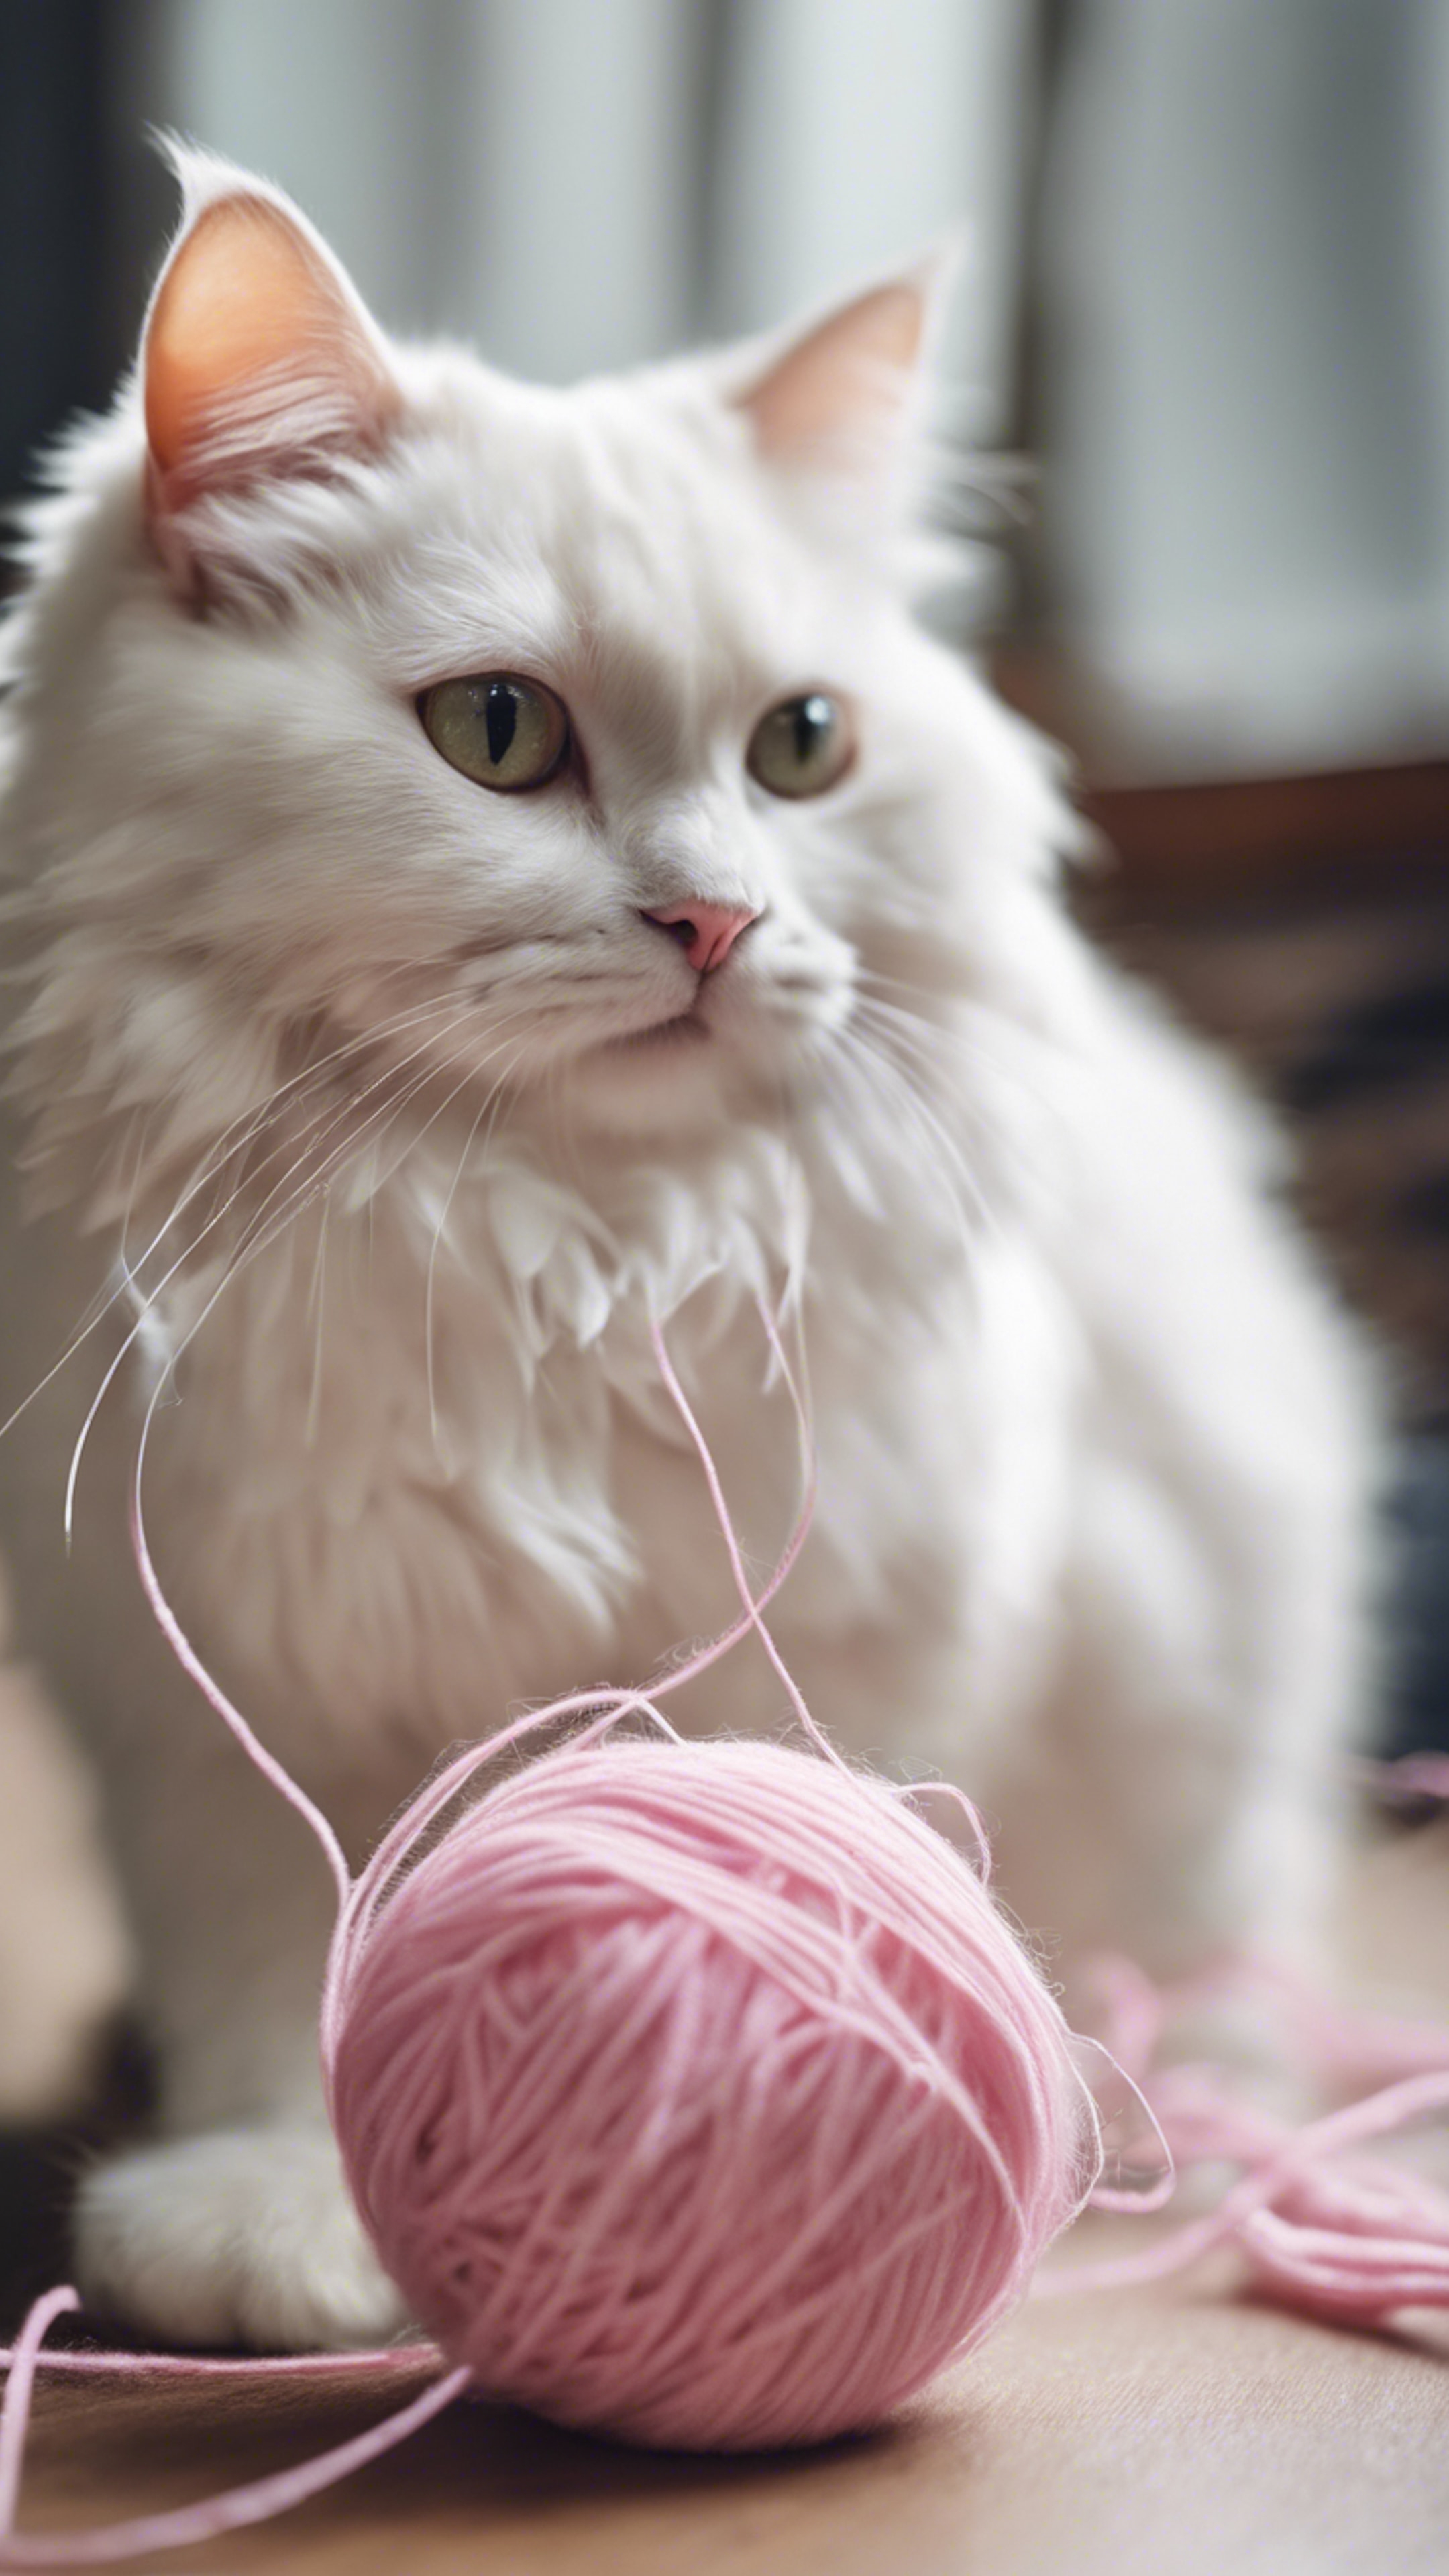 An adorable white cat, fluff all around, playing with a pink ball of yarn. Tapeta[2f9056787526421e963d]